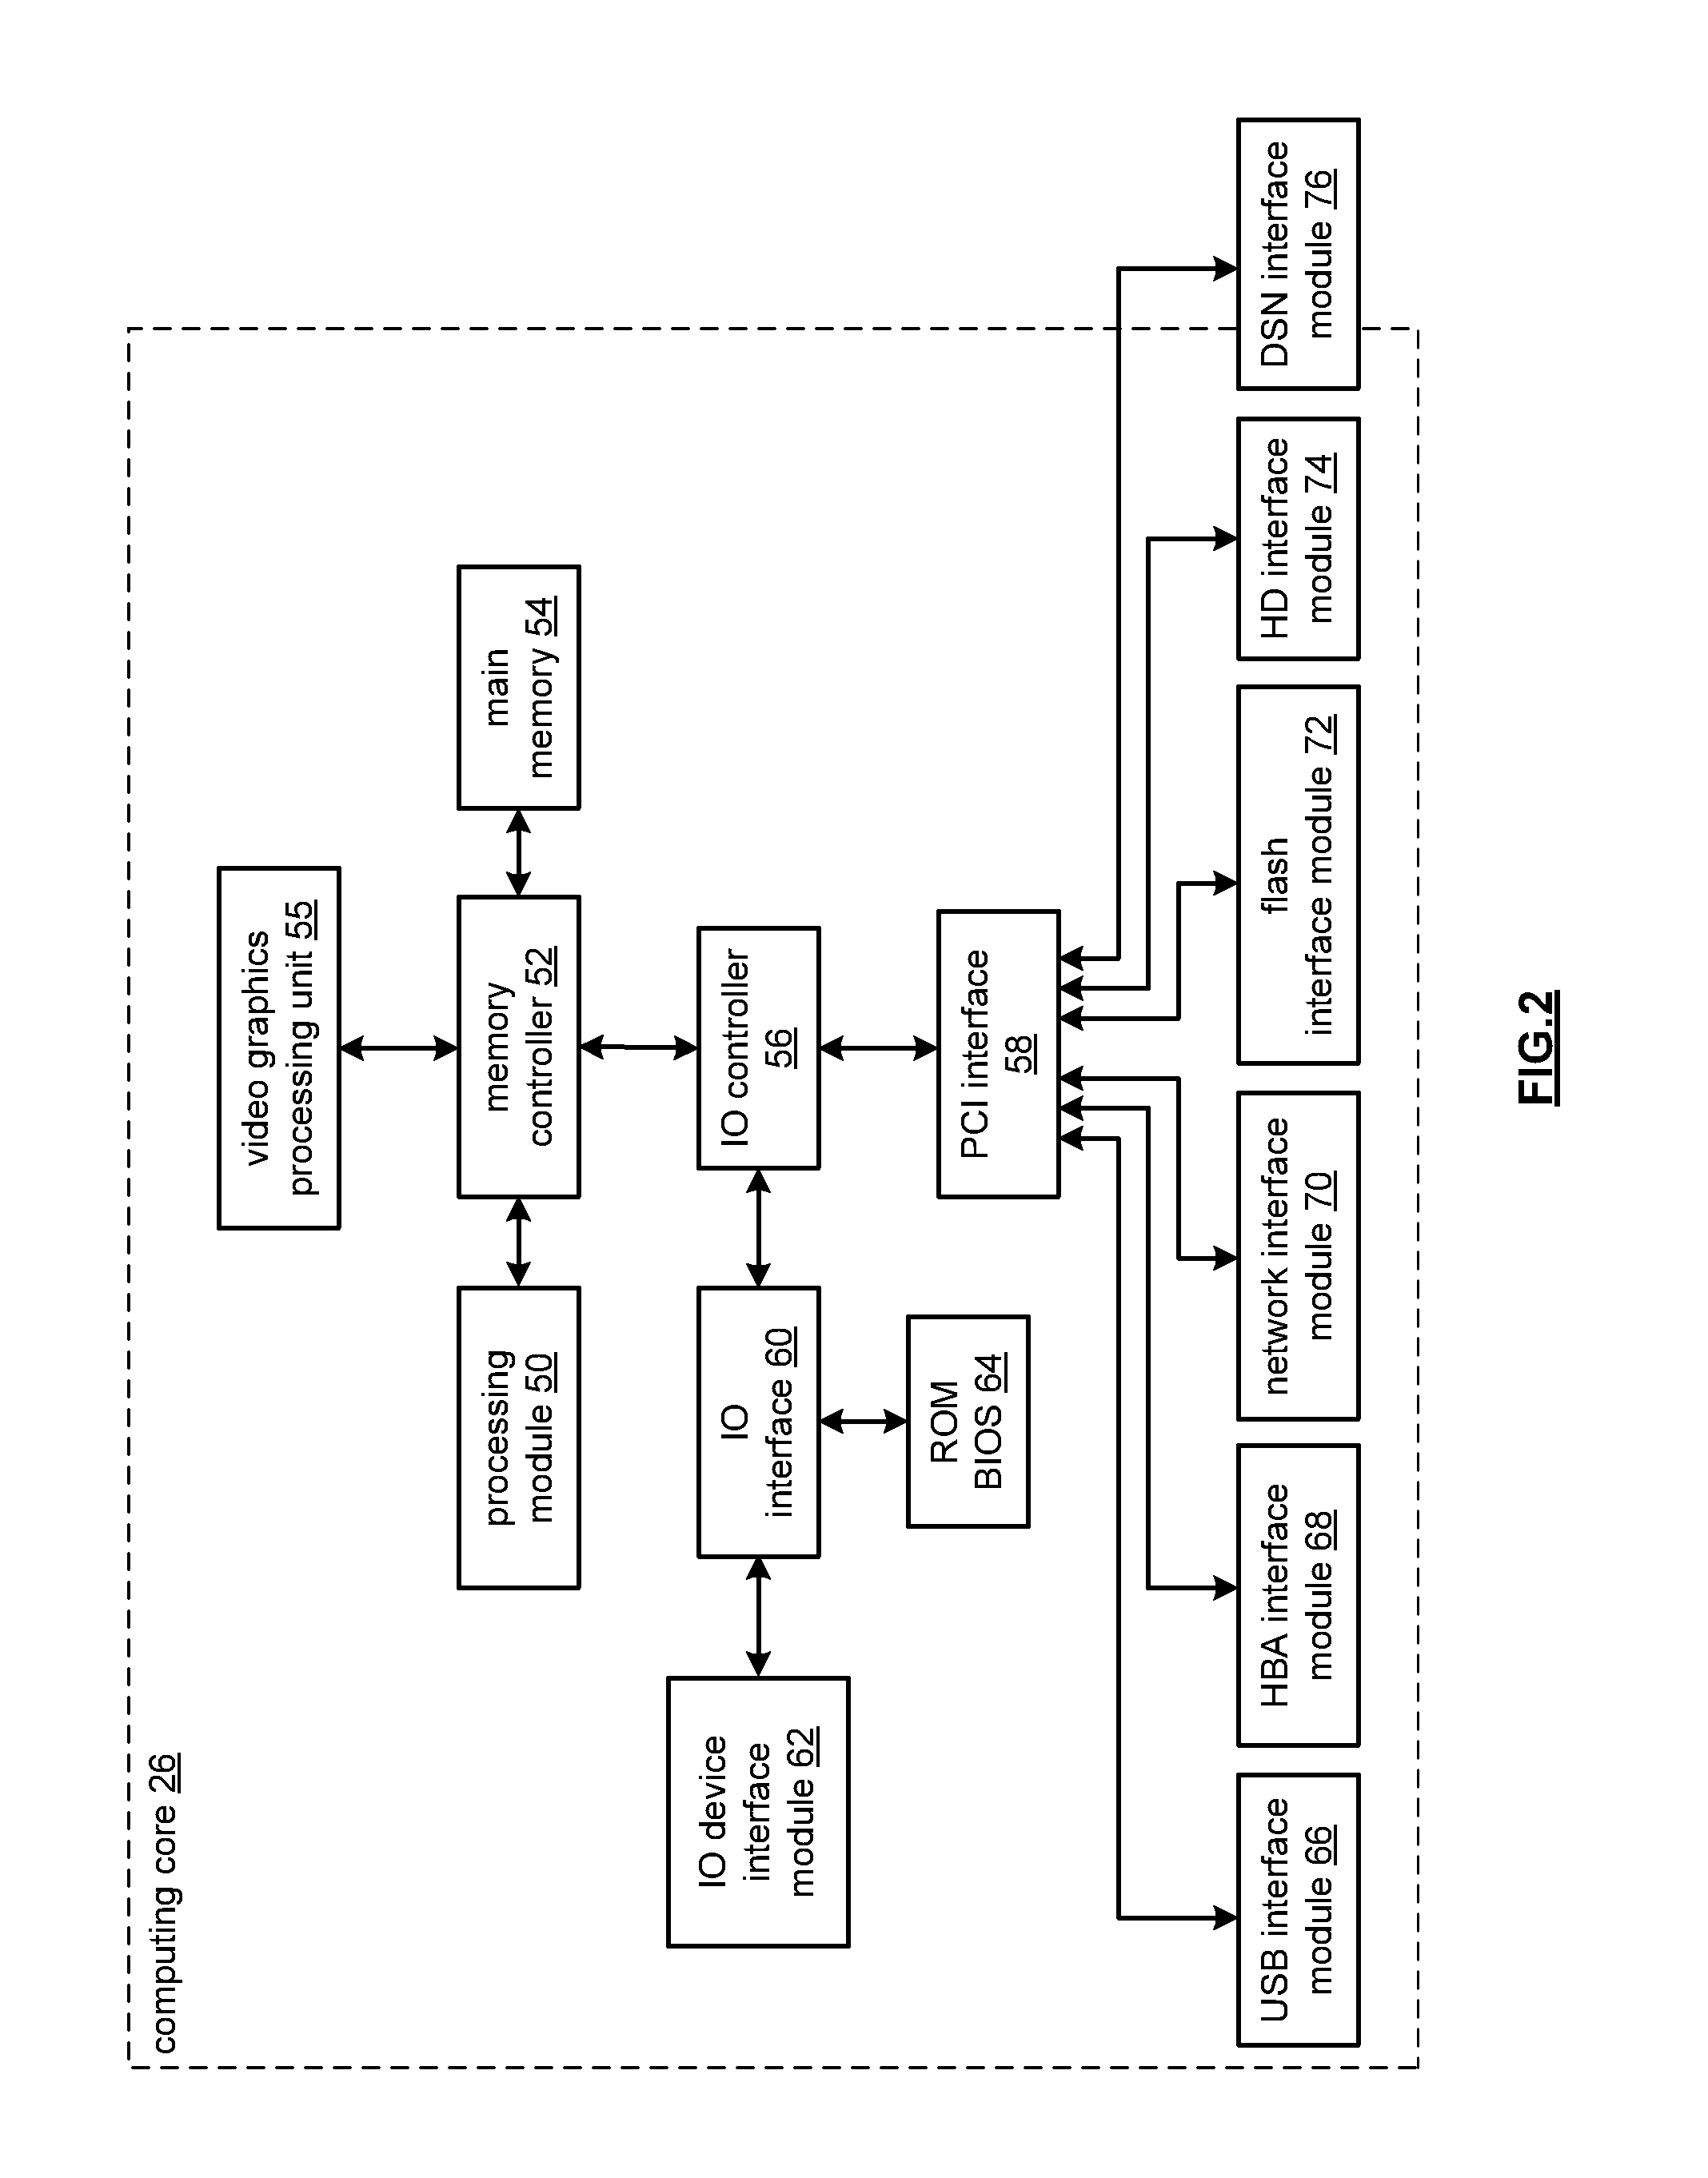 Router-based dispersed storage network method and apparatus